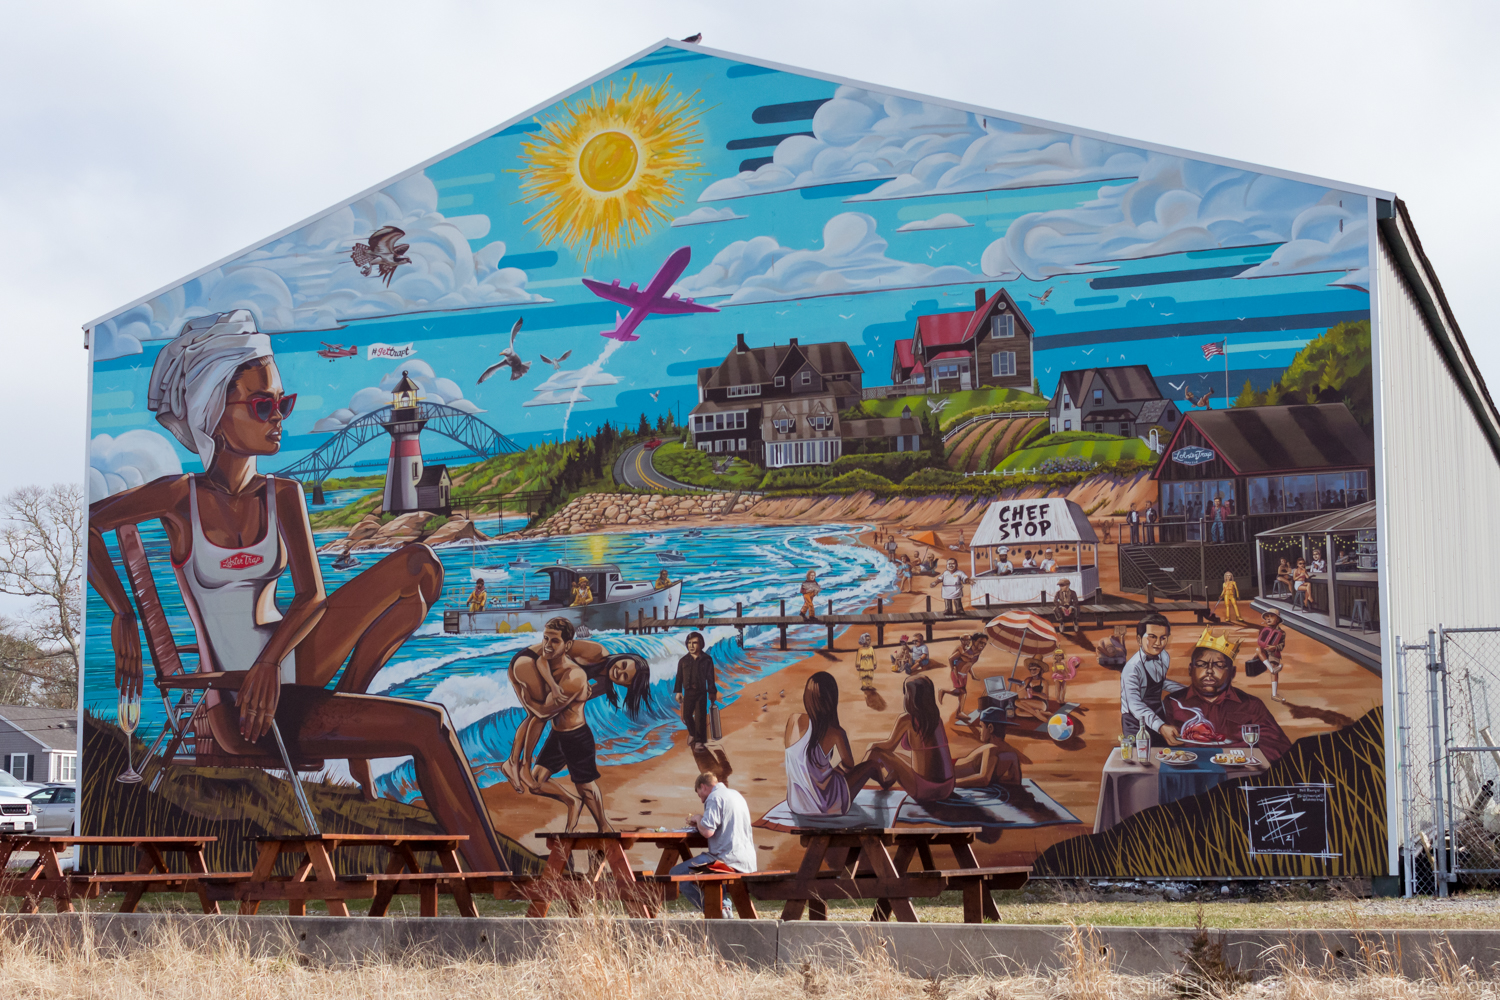 022-Cape-Cod-Bourne-Lobster-Trap-Mural-Marthas-day-in-Bourne-by-Phill-Bourque